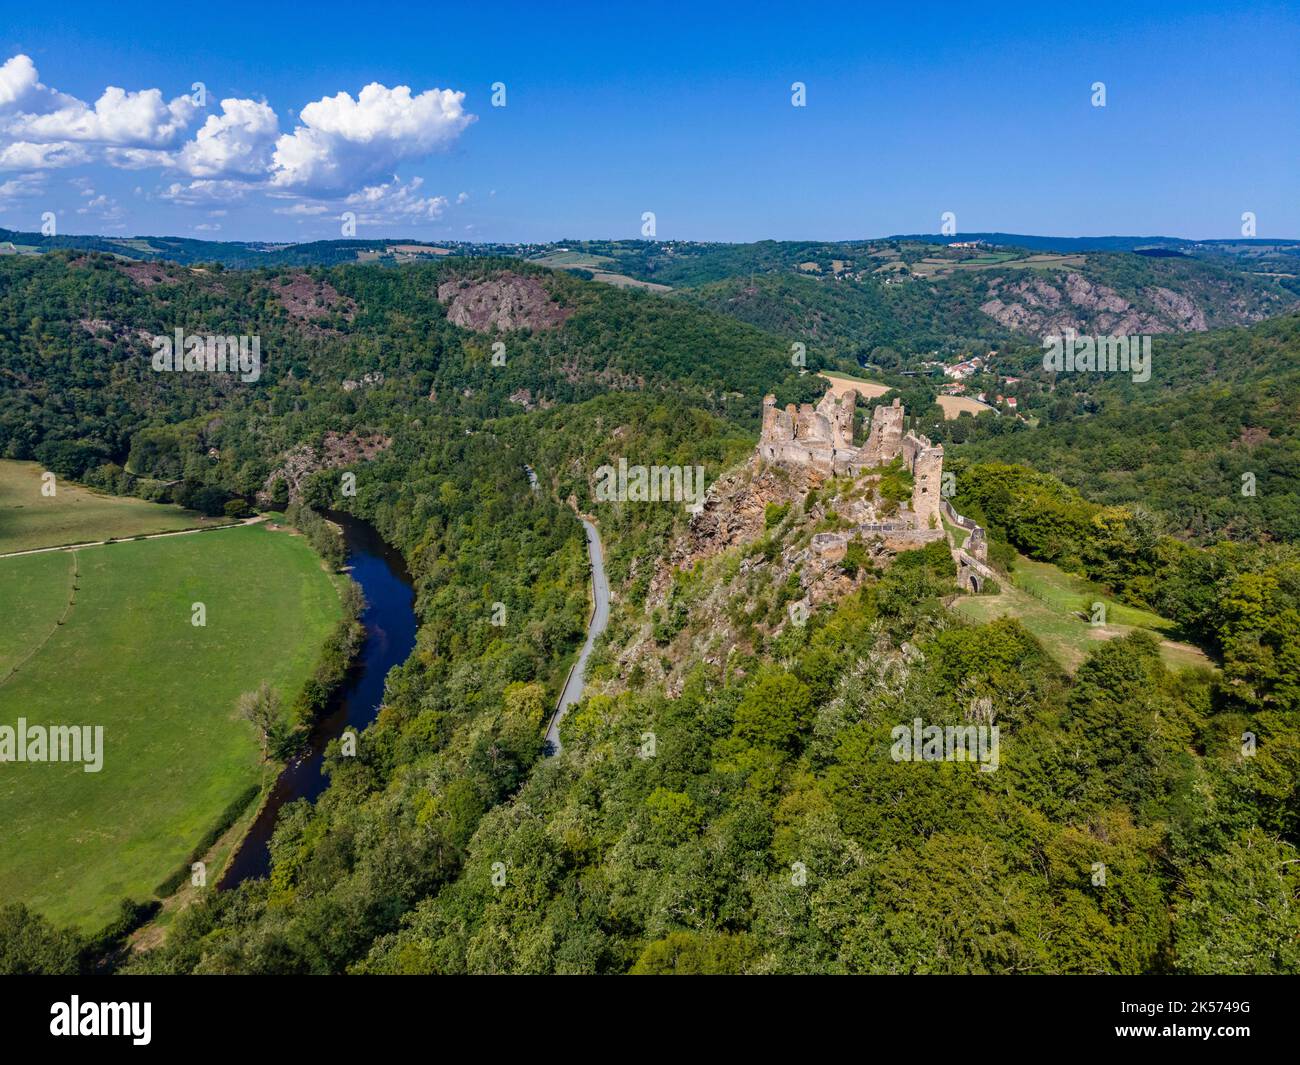 France, Puy de Dome, Saint Remy de Blot, Chateau Rocher, fortress of the 12th century overlooking the Sioule Gorges (aerial view) Stock Photo